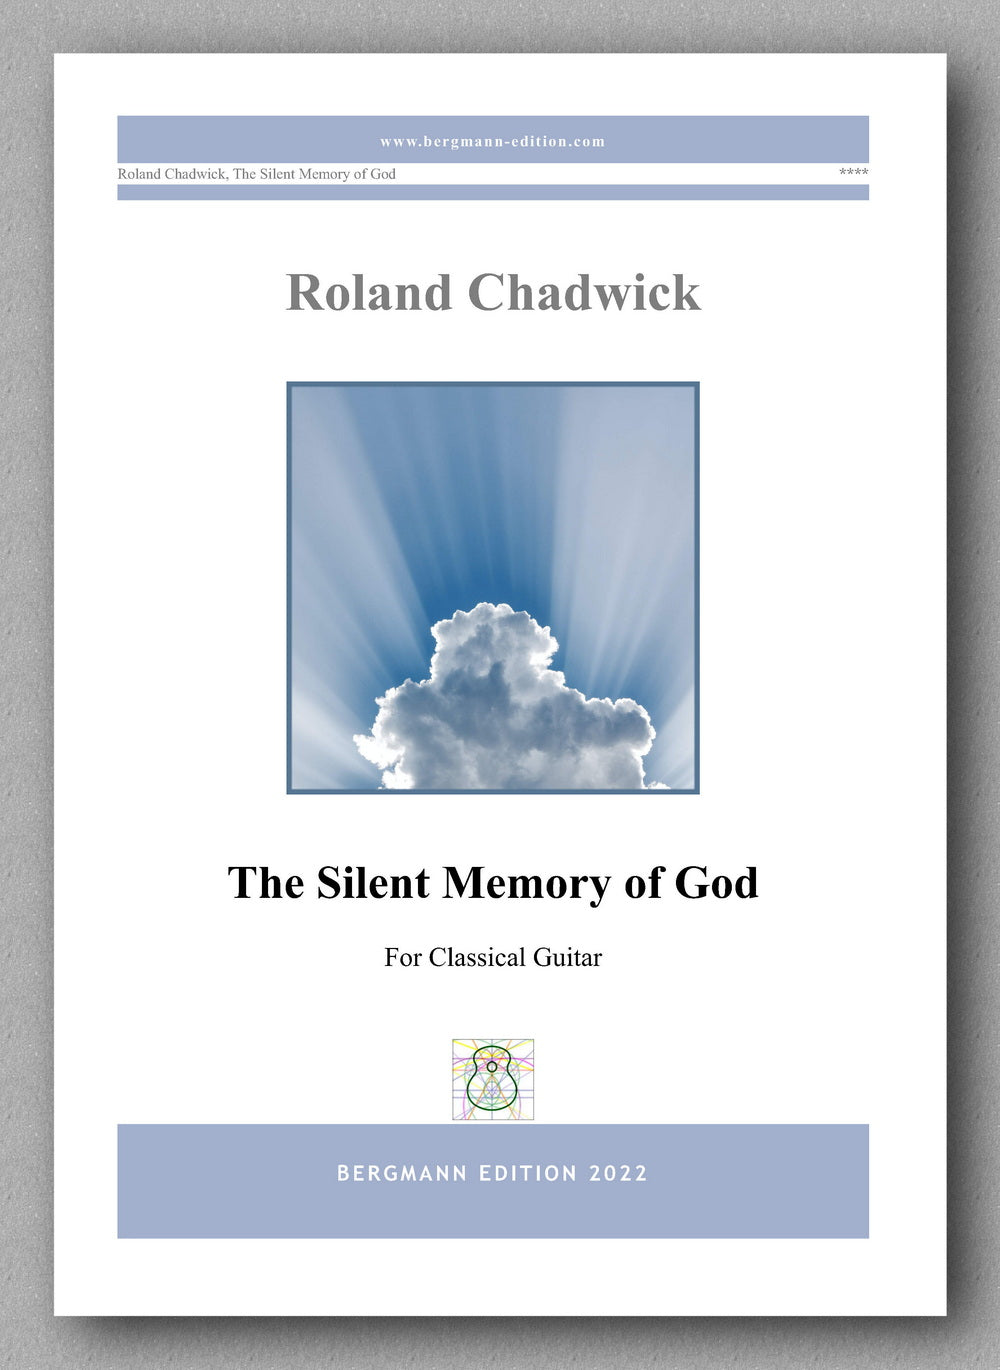 Roland Chadwick, The Silent Memory of God - preview of the cover